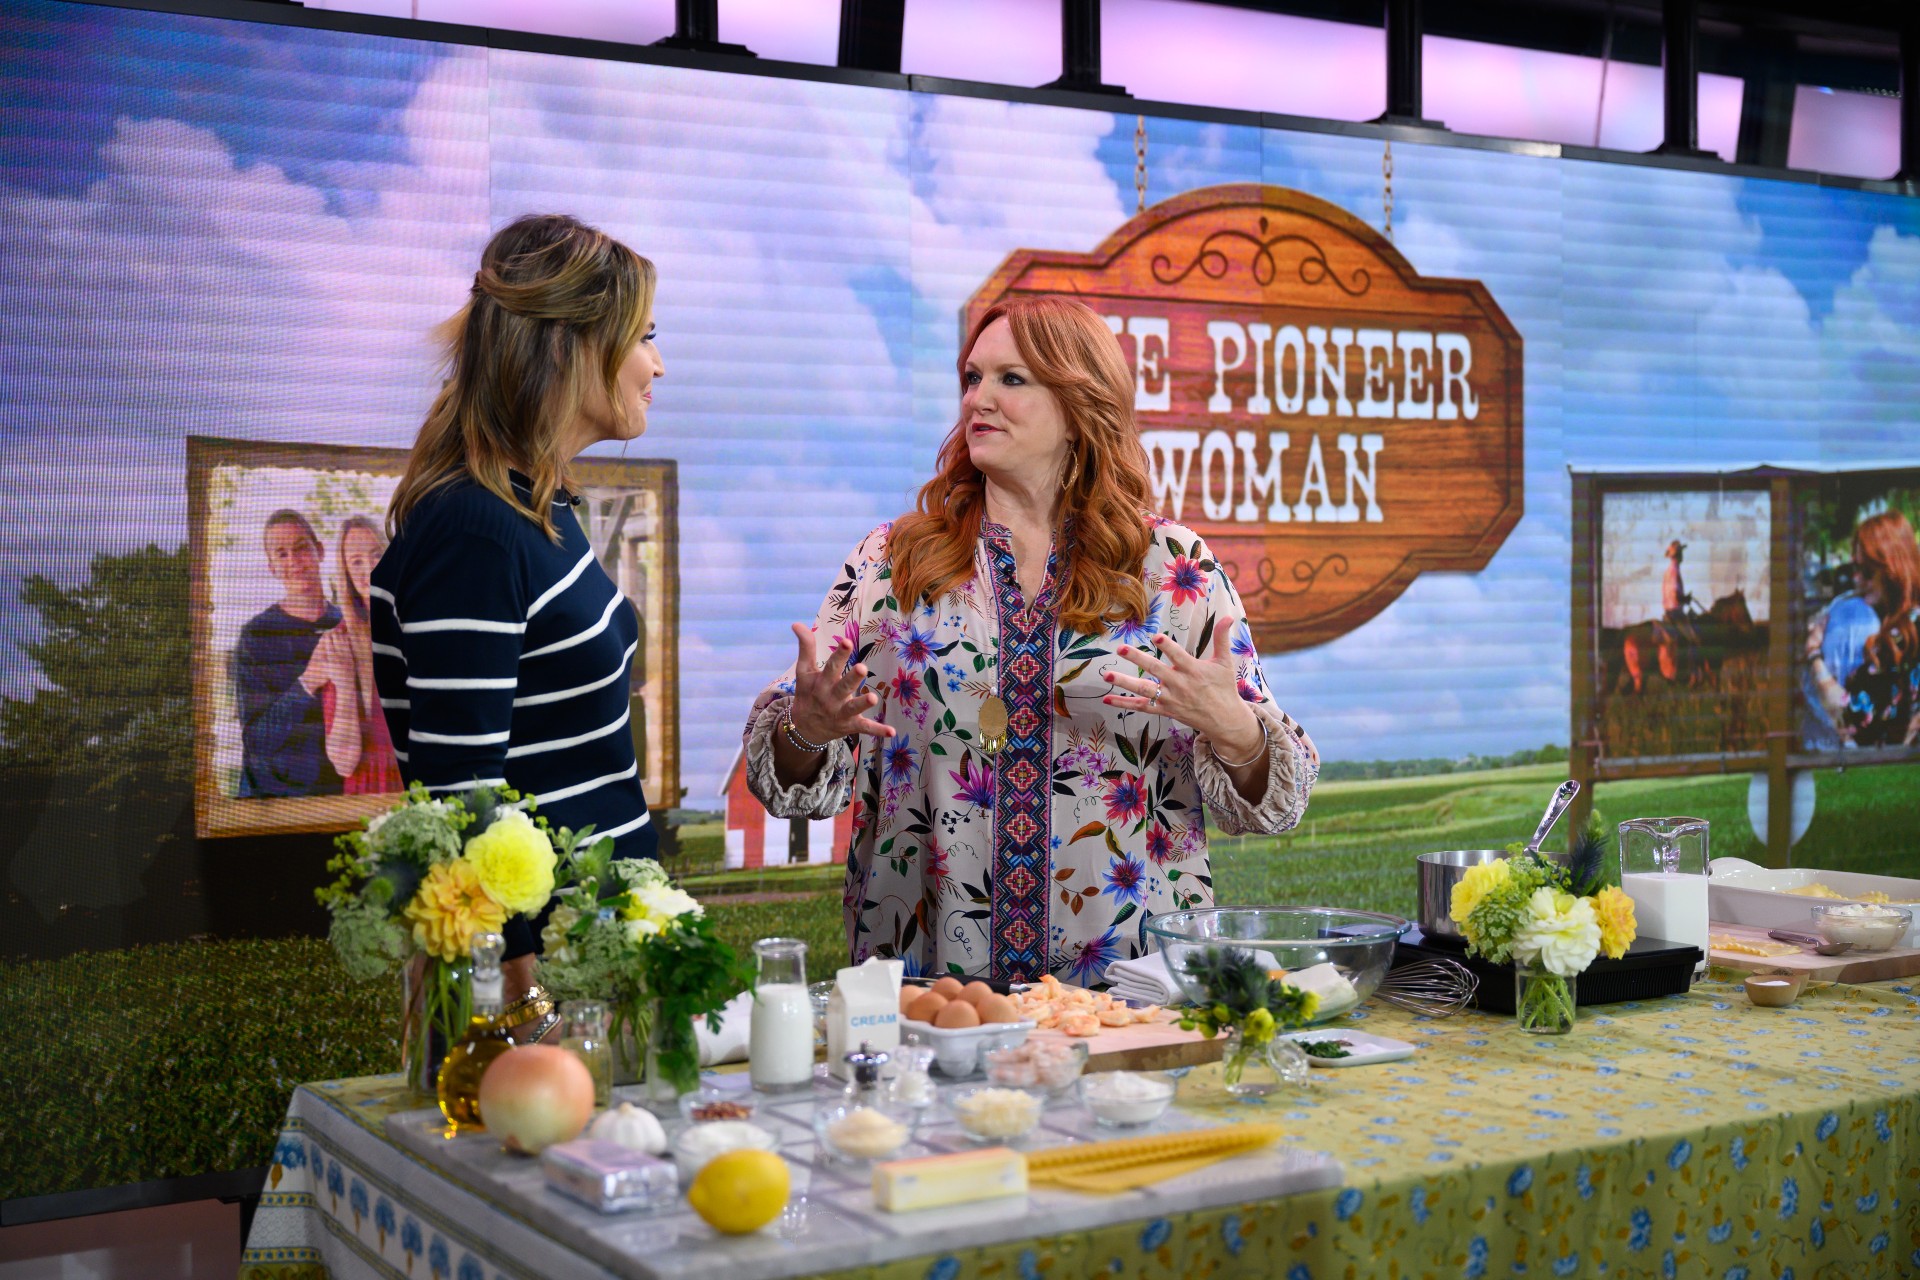 Savannah Guthrie and Ree Drummond give a cooking demonstration on the Today show.